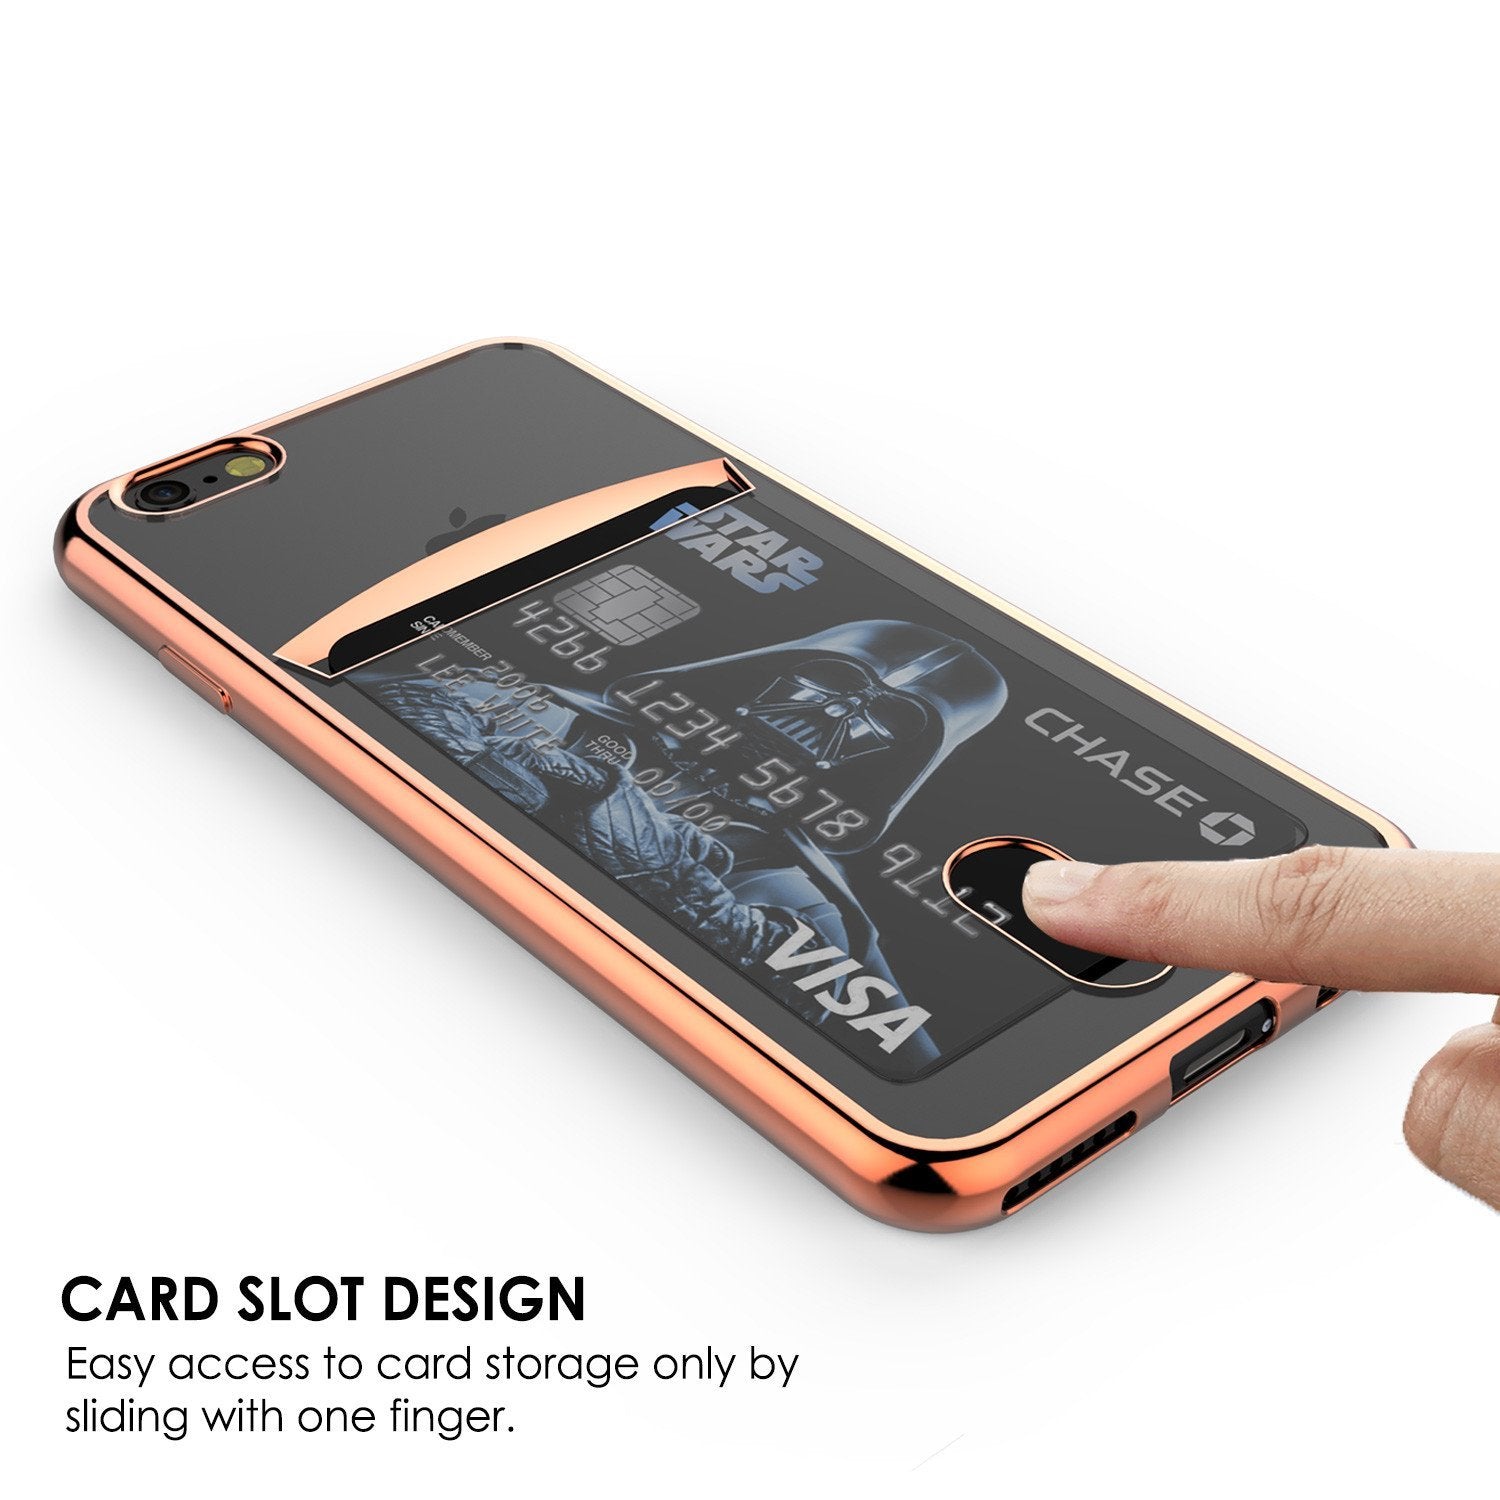 iPhone 8 Case, PUNKCASE® LUCID Rose Gold Series | Card Slot | SHIELD Screen Protector | Ultra fit